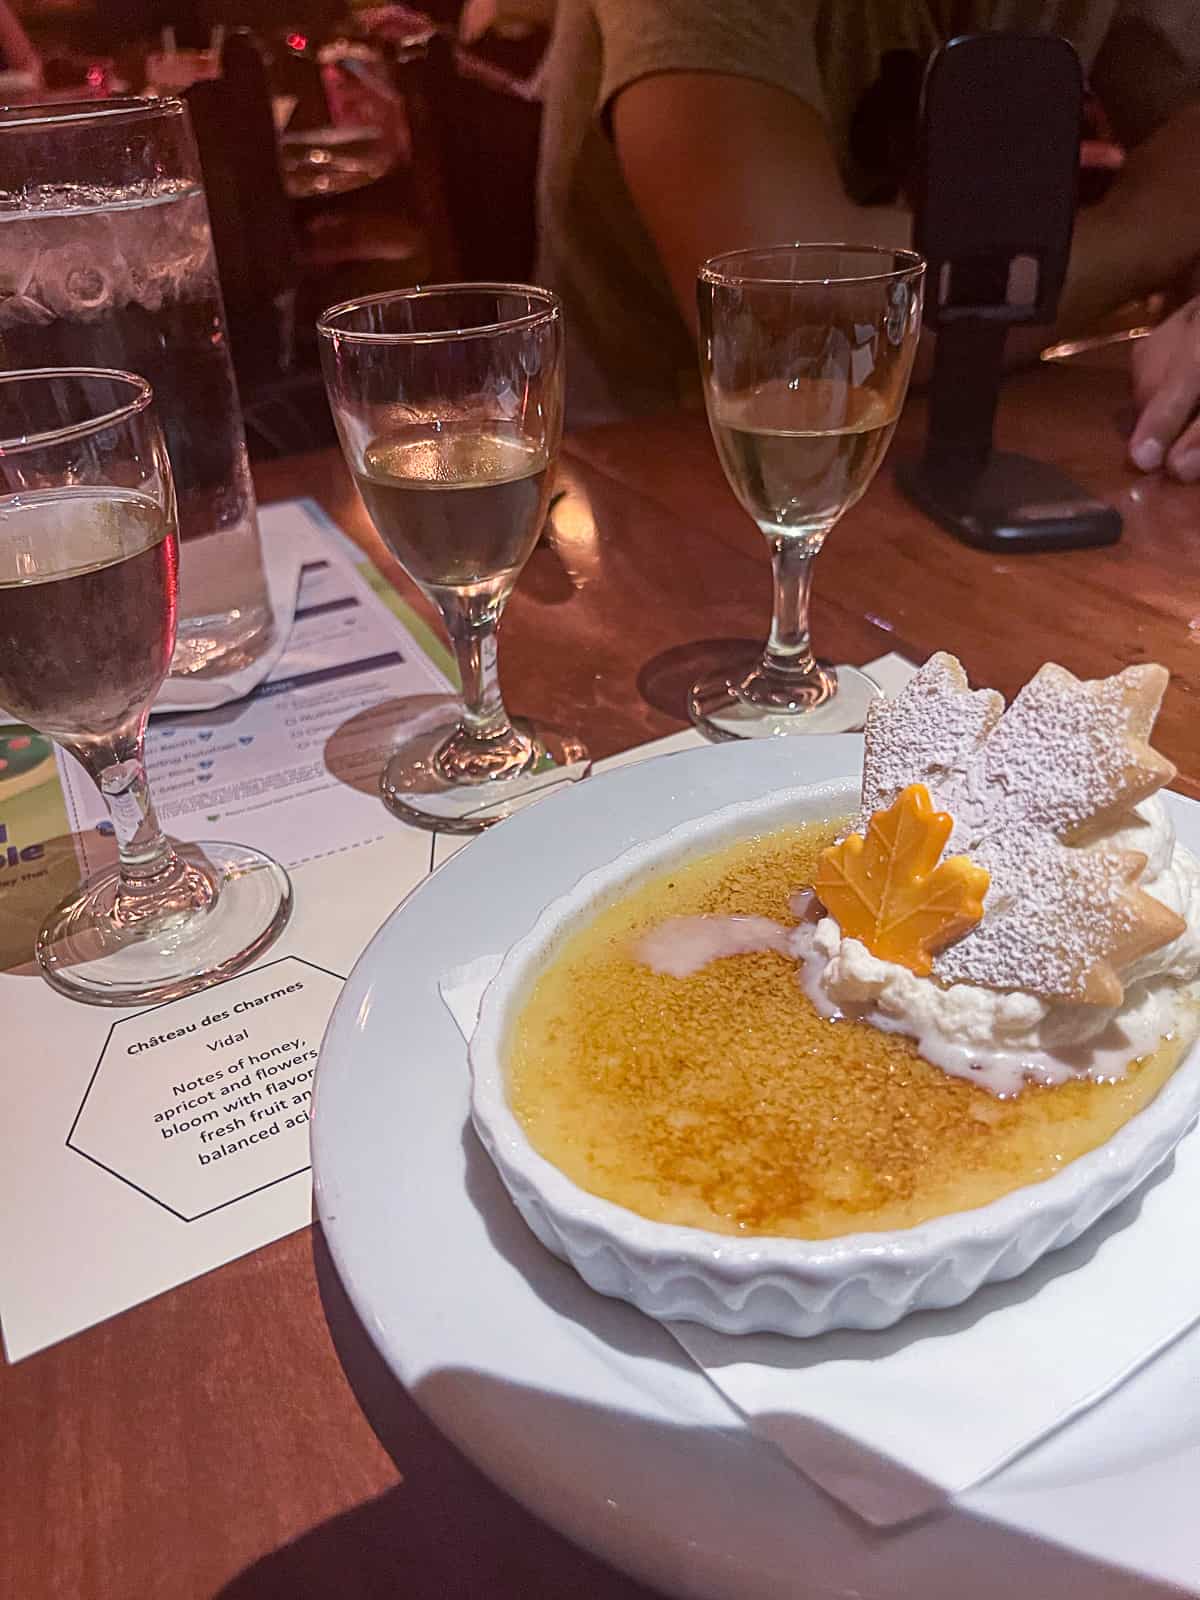 Maple Creme Brulee Dessert at Le Cellier Restaurant in Canada with Ice Wine Flight